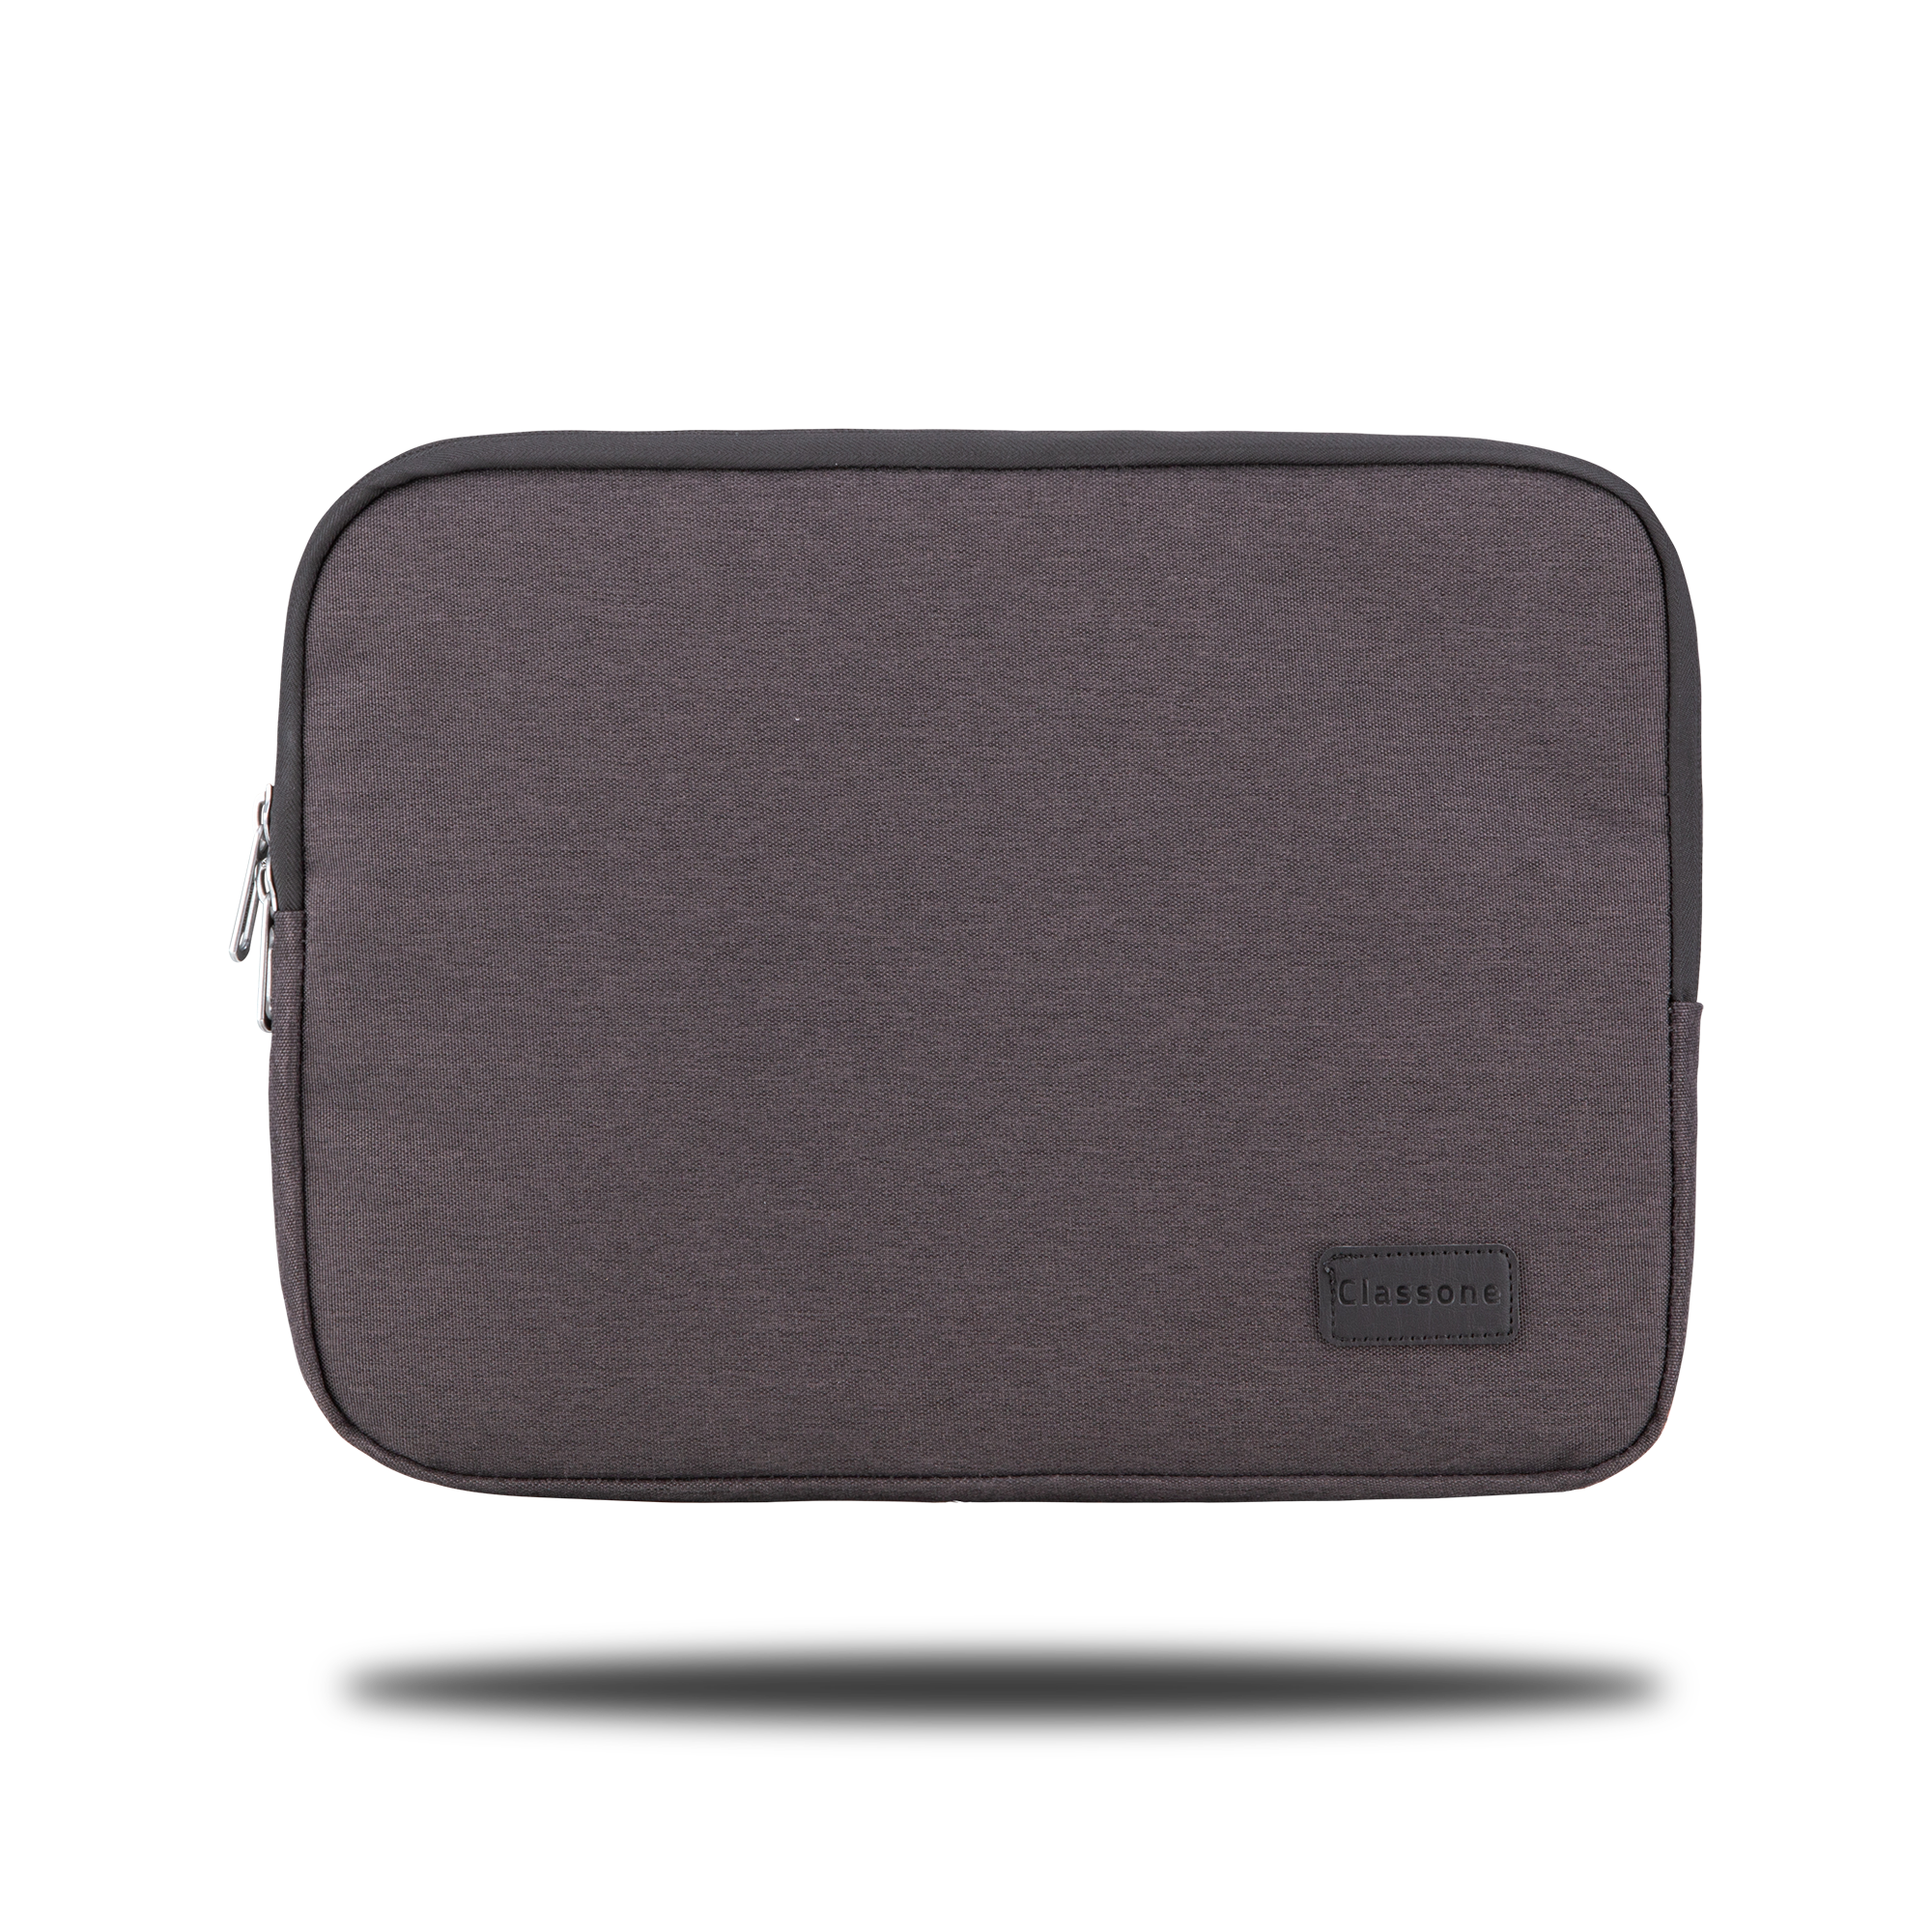 Classone Livorno Series WSL1504 15.6 inch compatible WTXpro Waterproof Fabric Macbook, Laptop, Notebook Carrying Case-Dark Gray